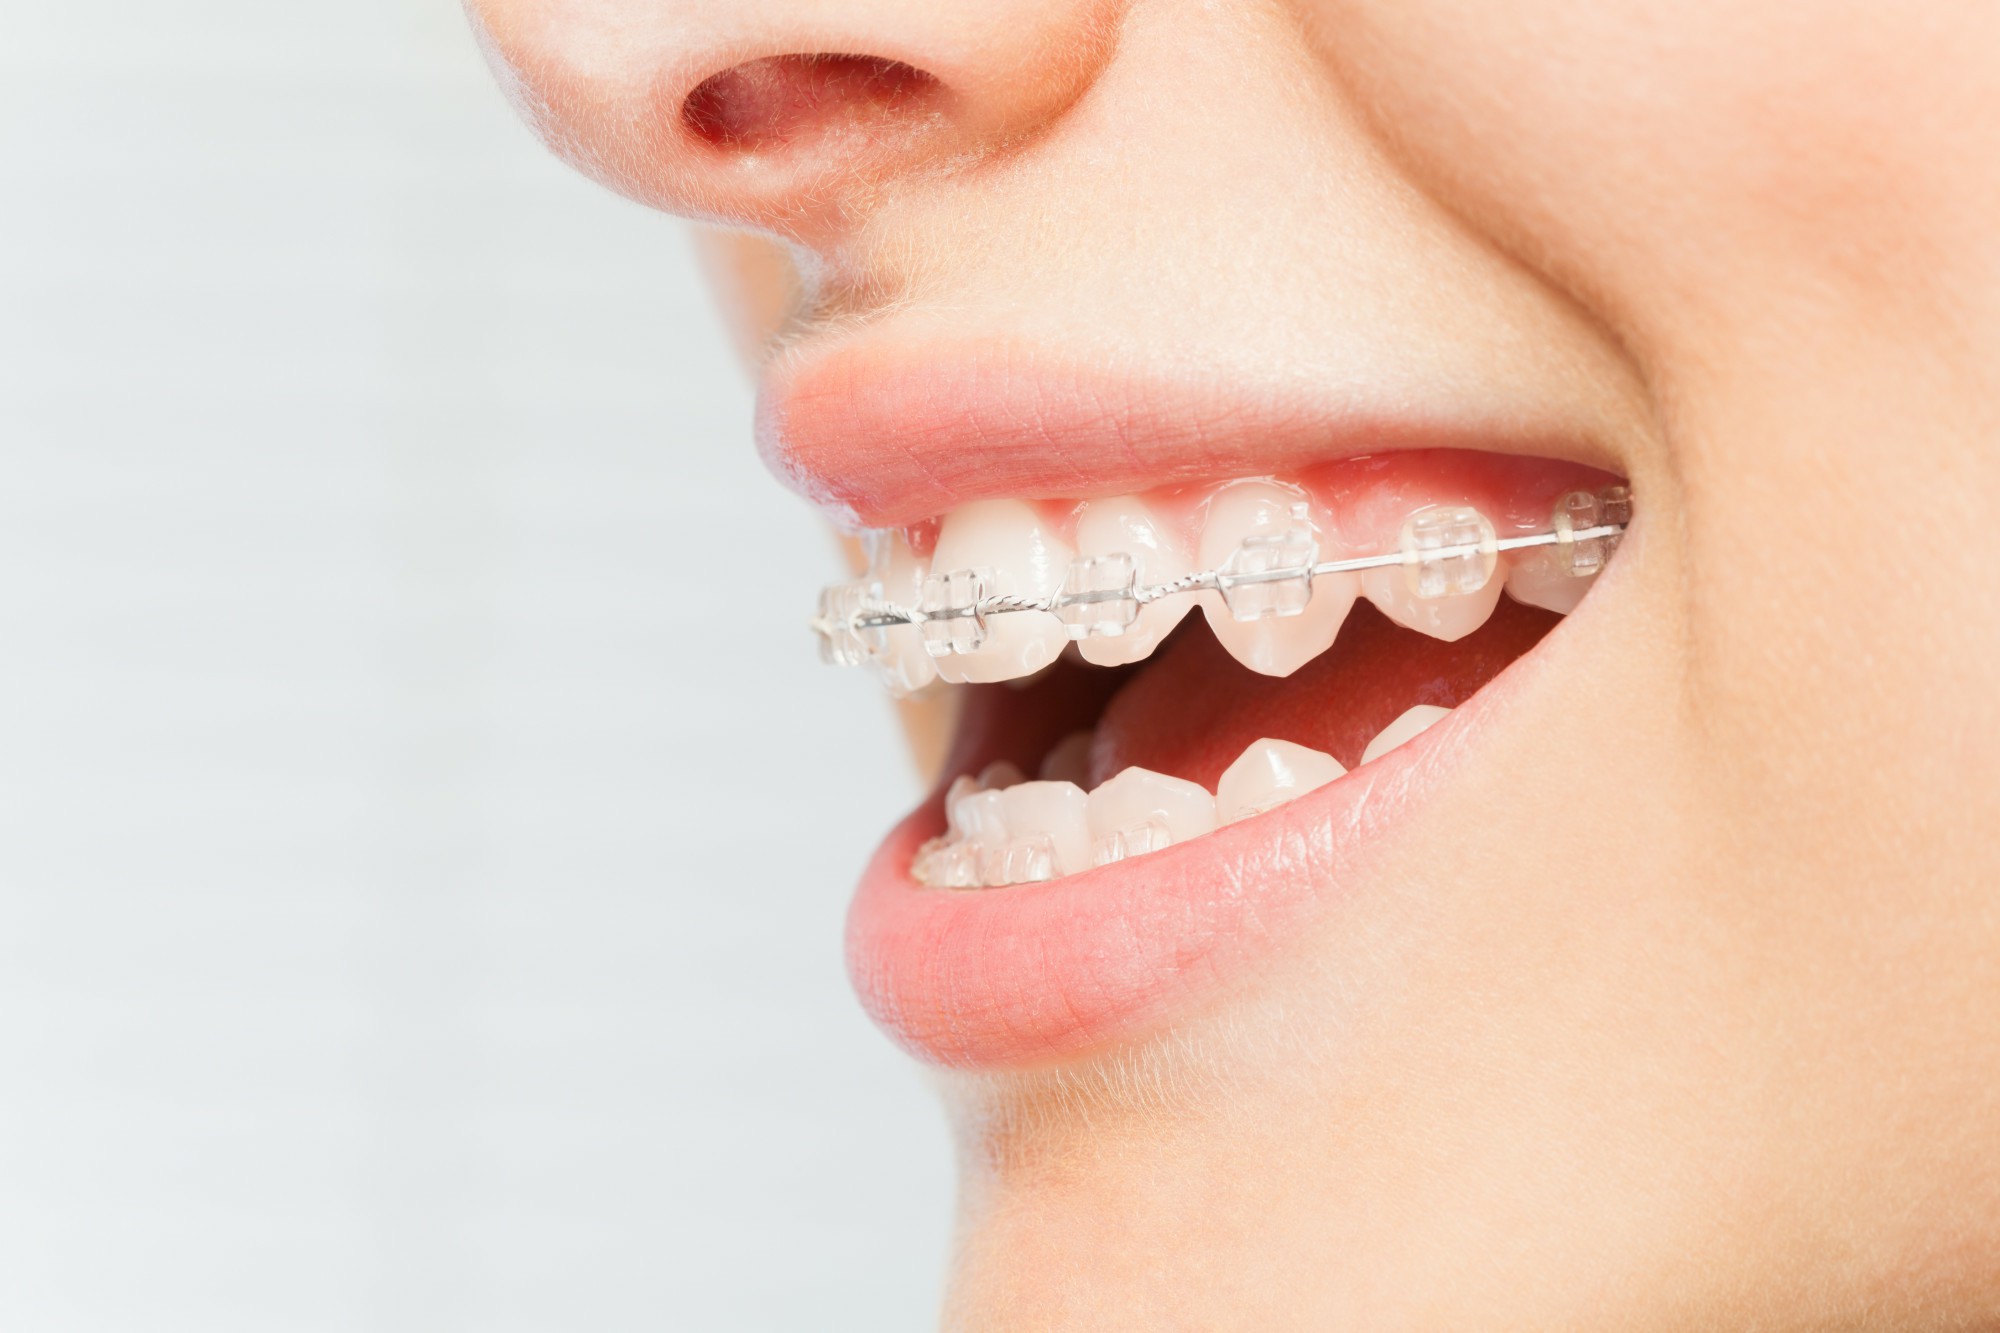 Goodbye Crooked Teeth: A Look at Different Braces Options